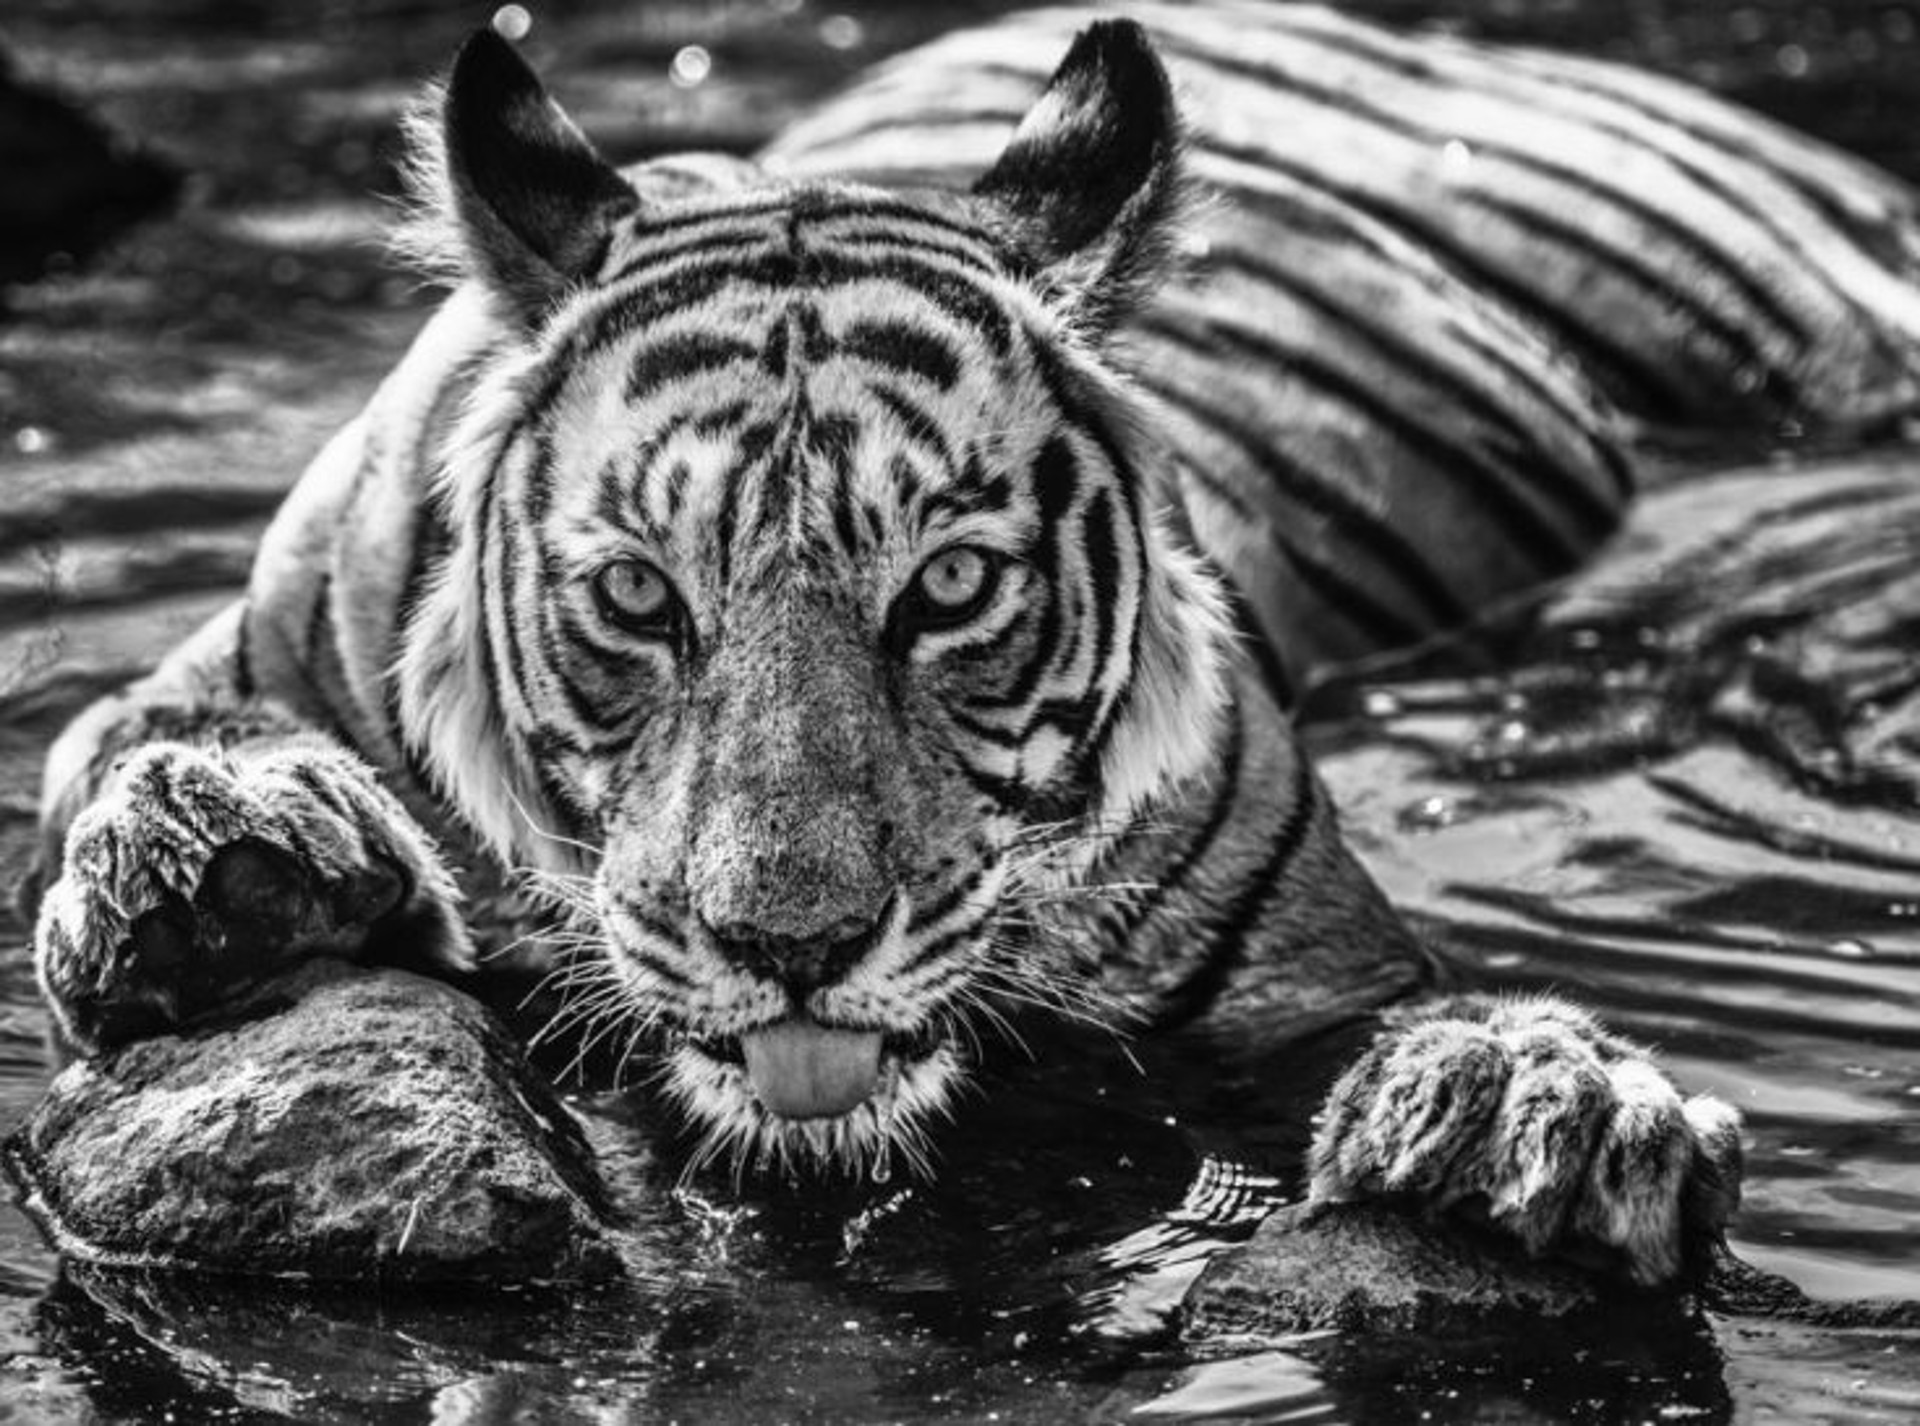 The Queen of Ranthamb Ore by David Yarrow